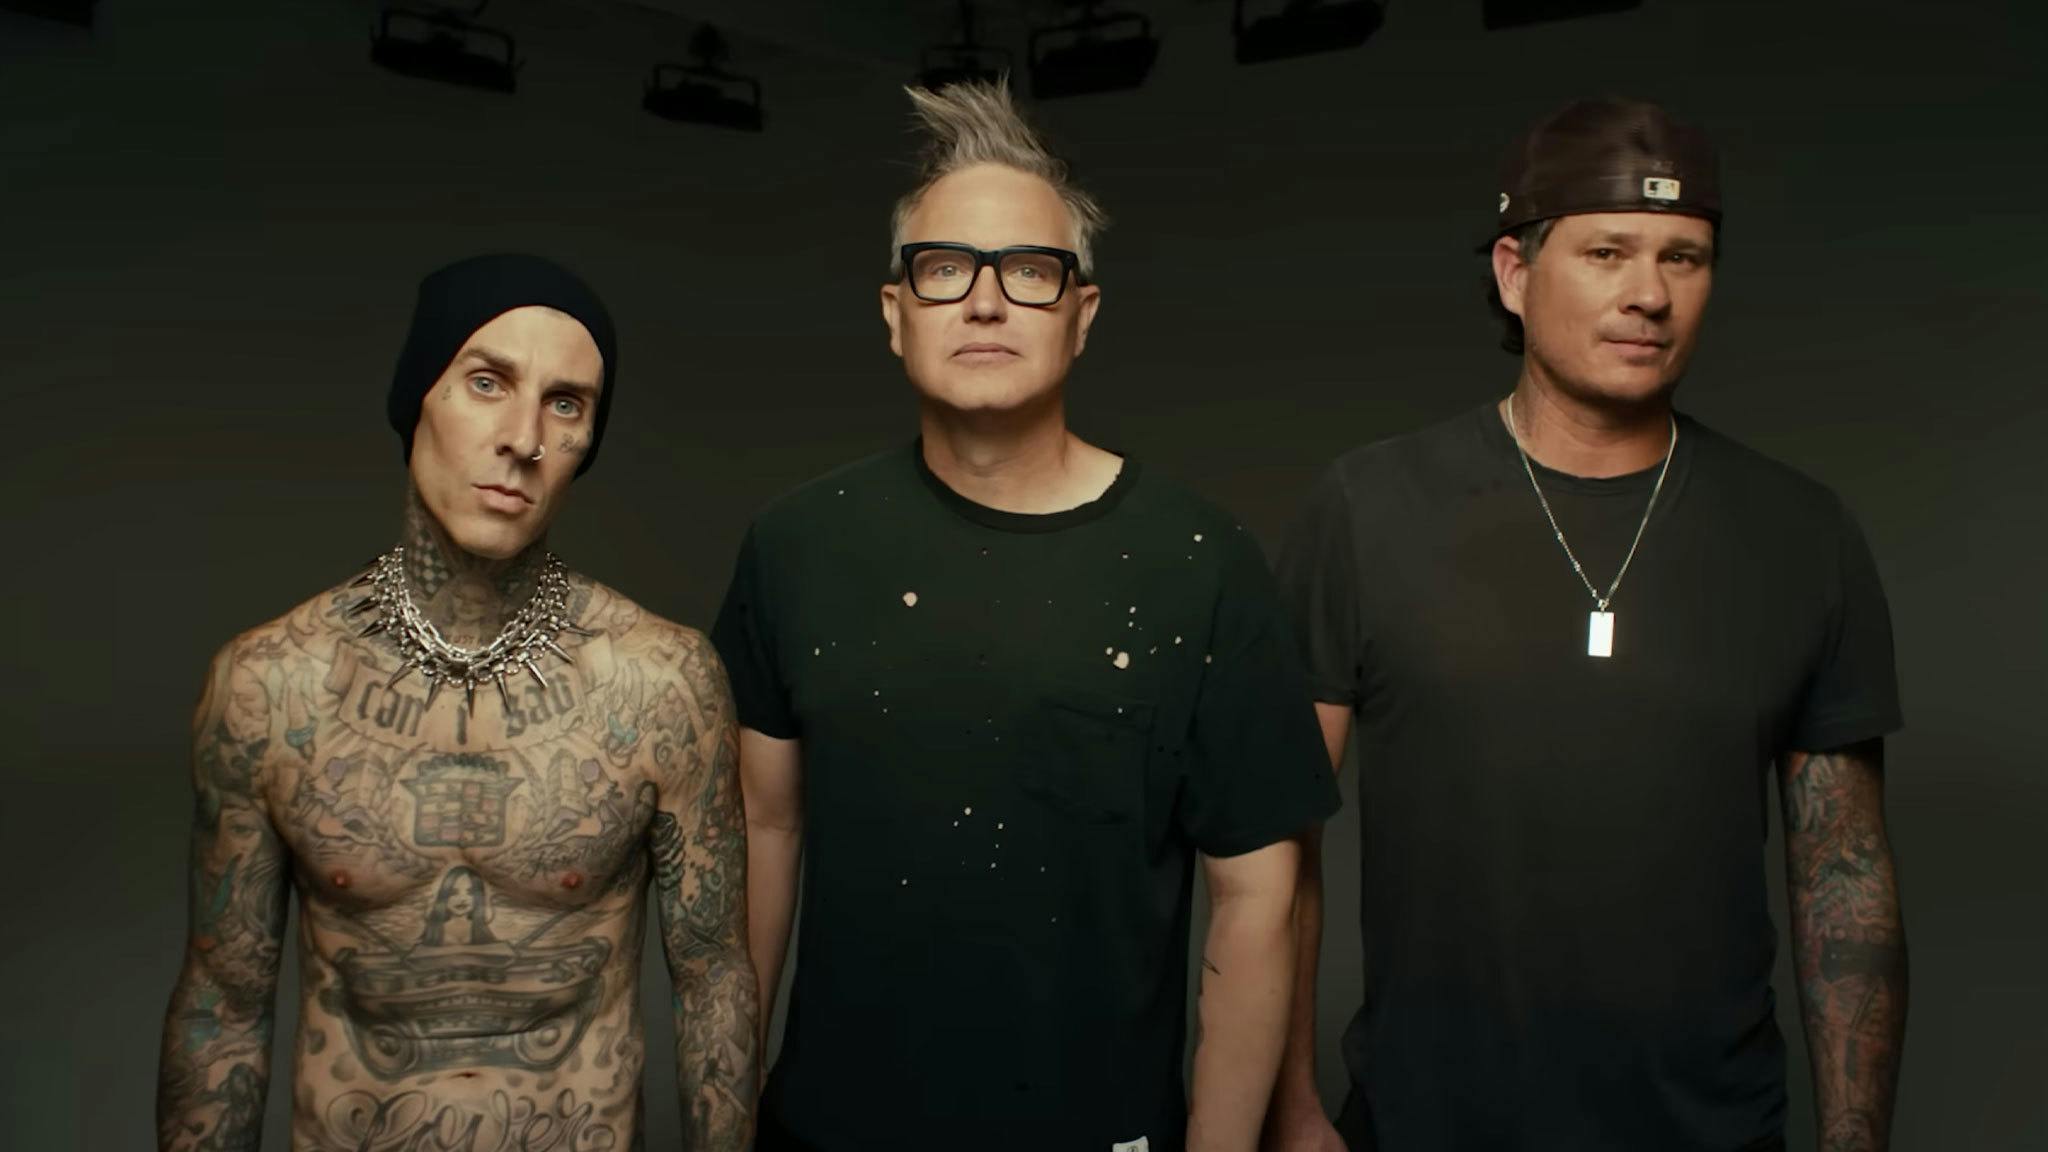 blink-182 are finishing their new album this week